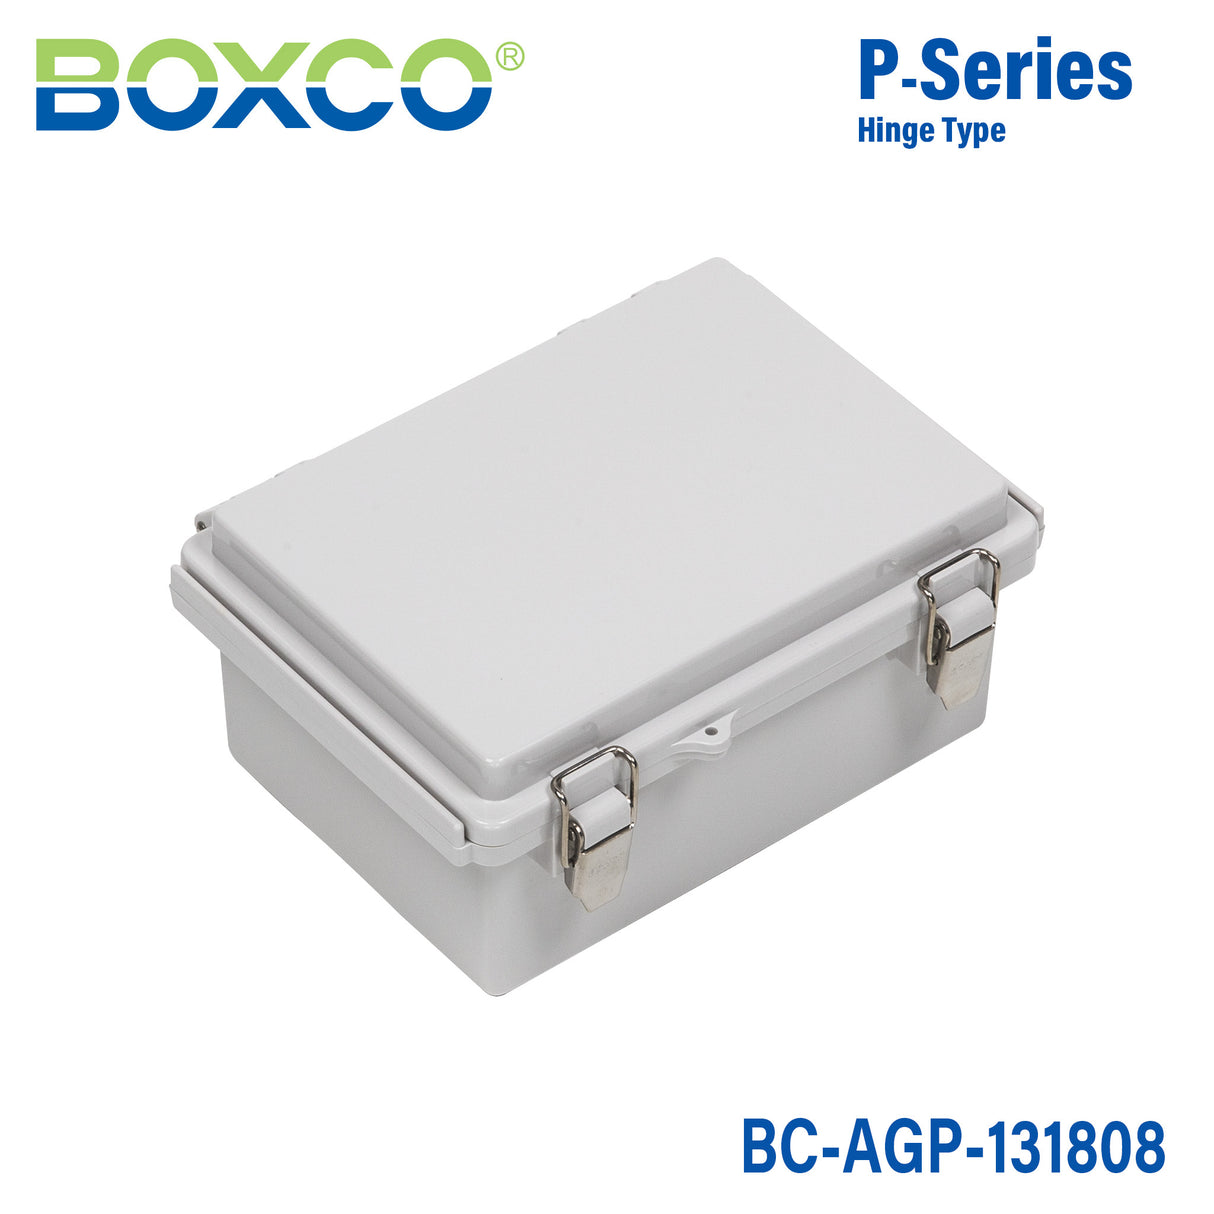 Boxco P-Series 135x185x85mm Plastic Enclosure, IP67, IK08, ABS, Grey Cover, Molded Hinge and Latch Type